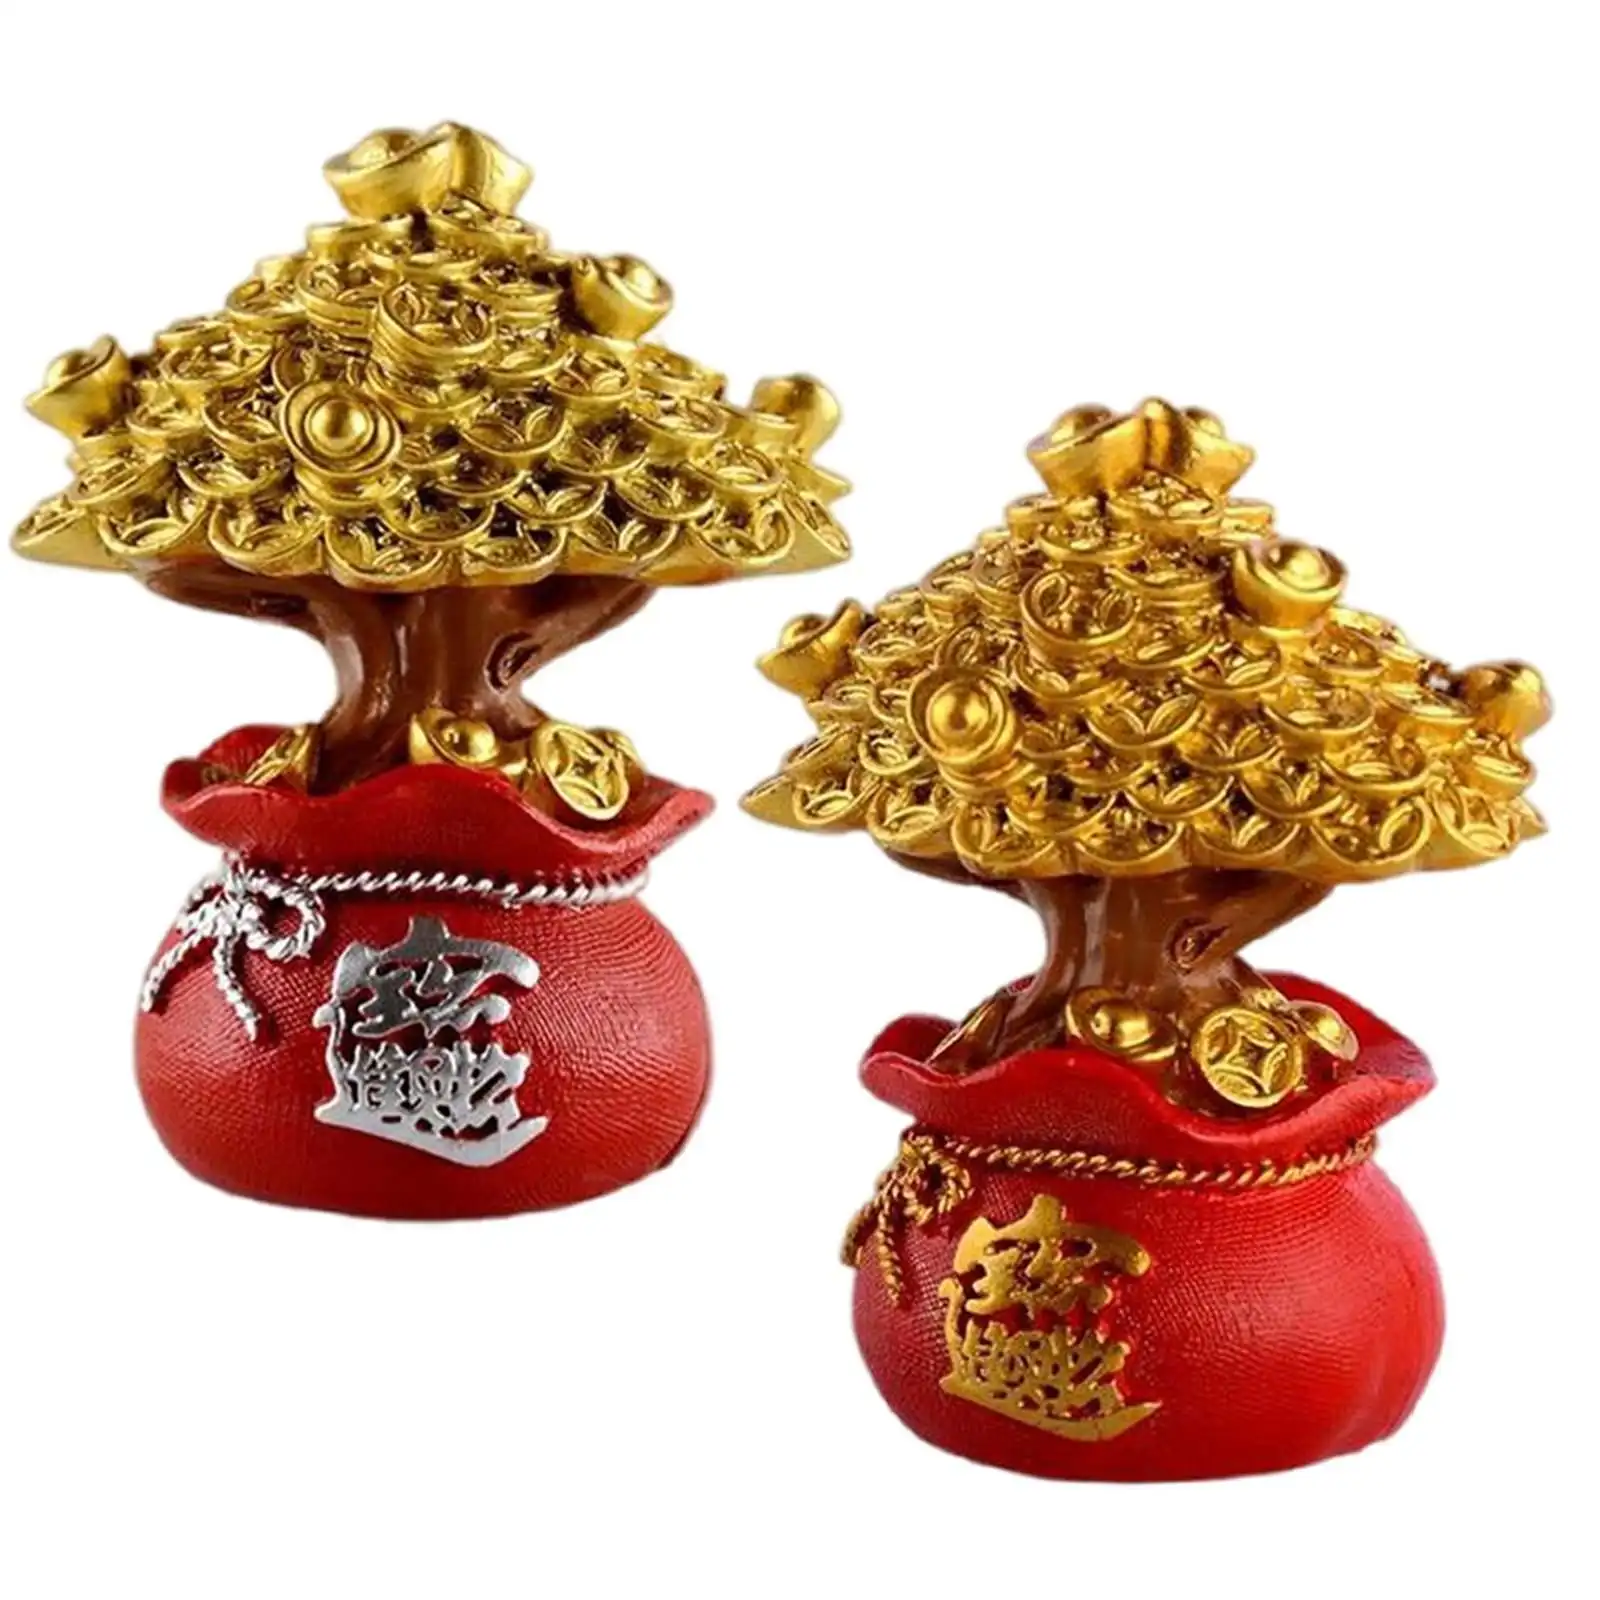 2x Money Tree Feng Shui Ornaments Table Top Lucky Tree Home Decor Gifts